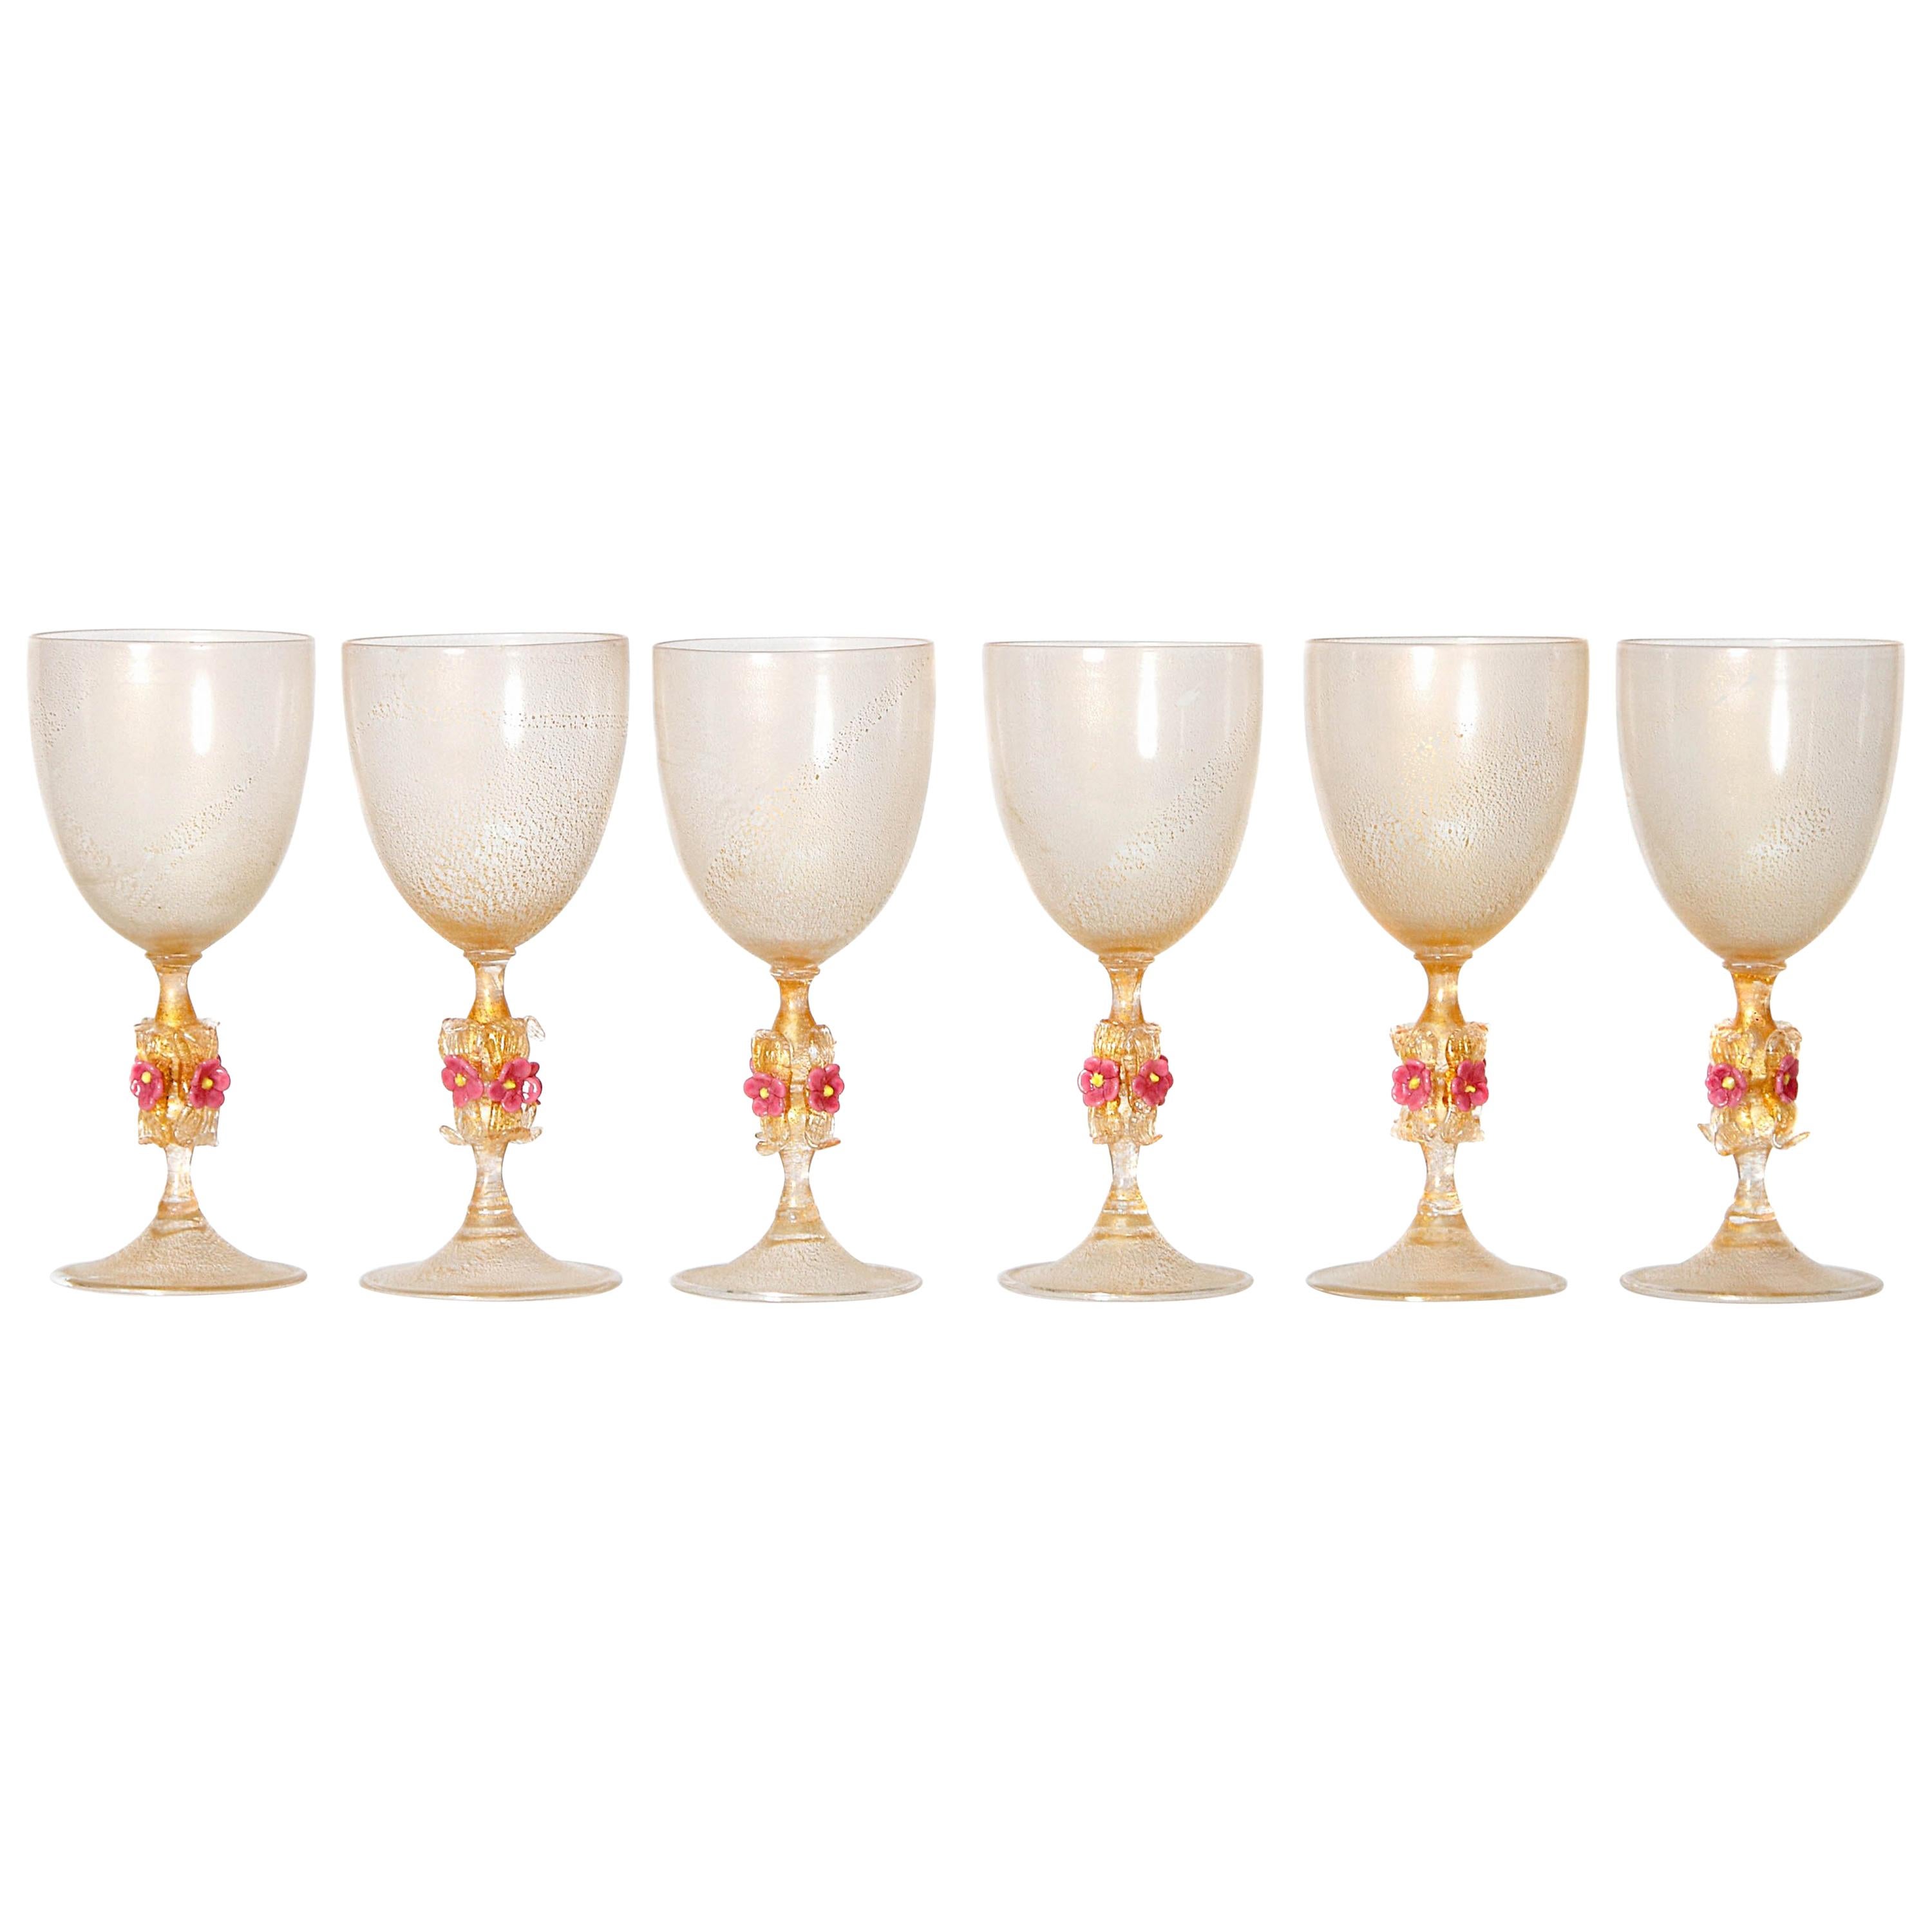 Murano Amber Glass Wine Goblets from Italy